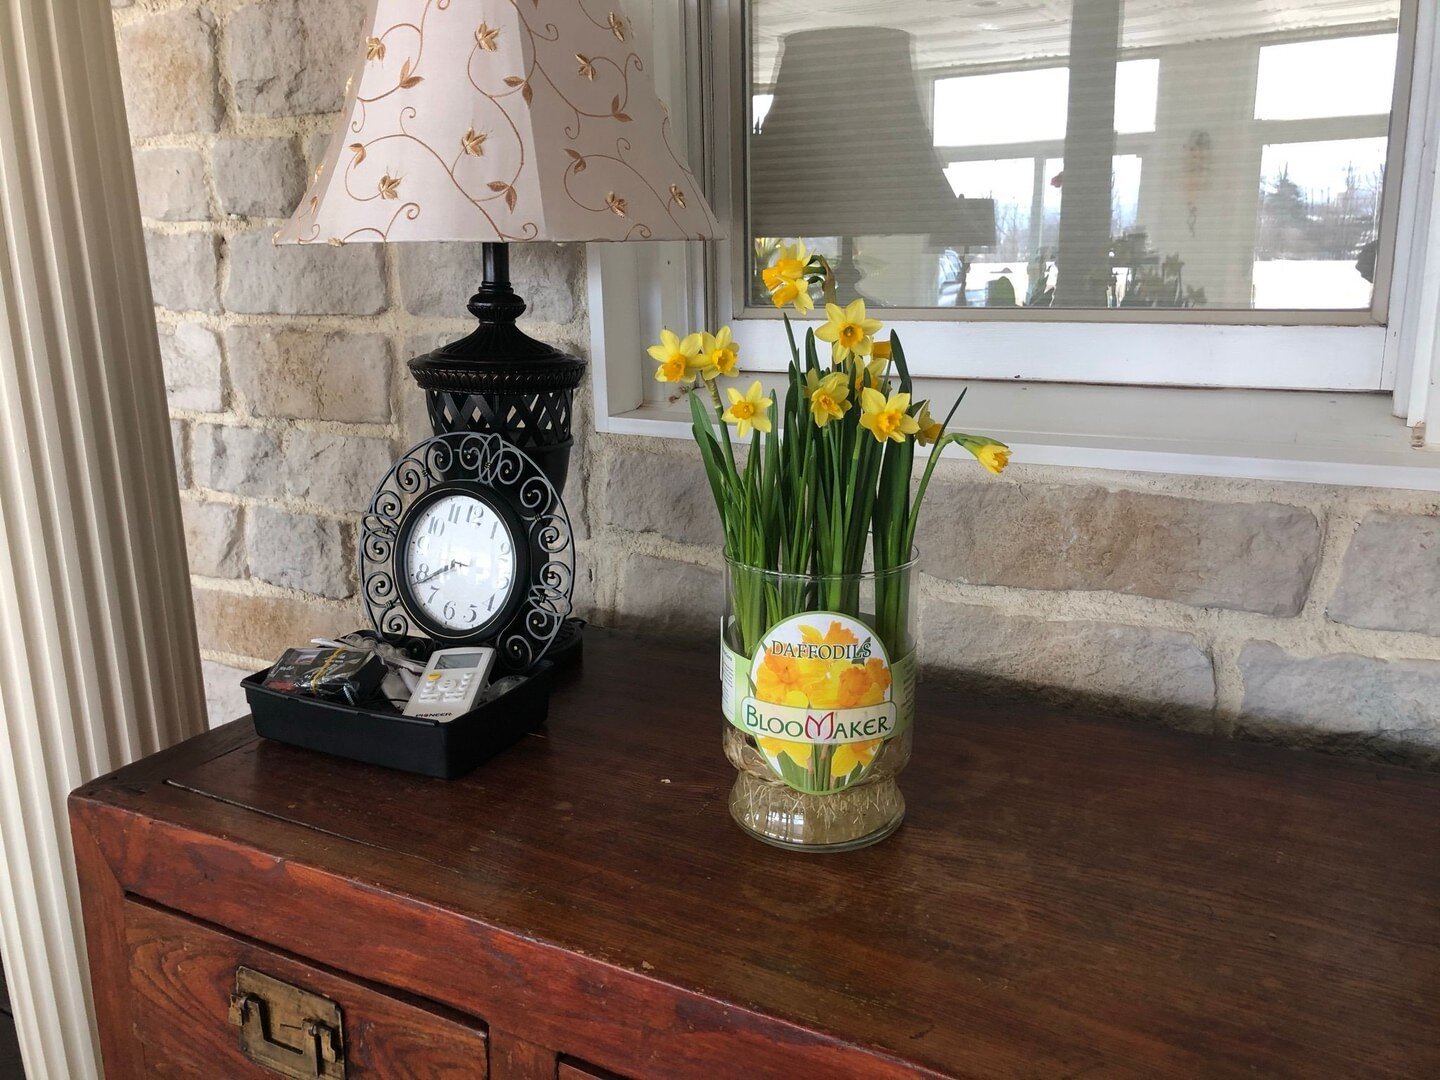 Top Tip Tuesday: If you've been growing Daffodils for numerous seasons make sure to divide the bulbs up as they tend to multiply over time. This can lead to crowded bulbs resulting in reduced blooms as they'd love some room to breathe! 💐
.
.
.
.
#Da